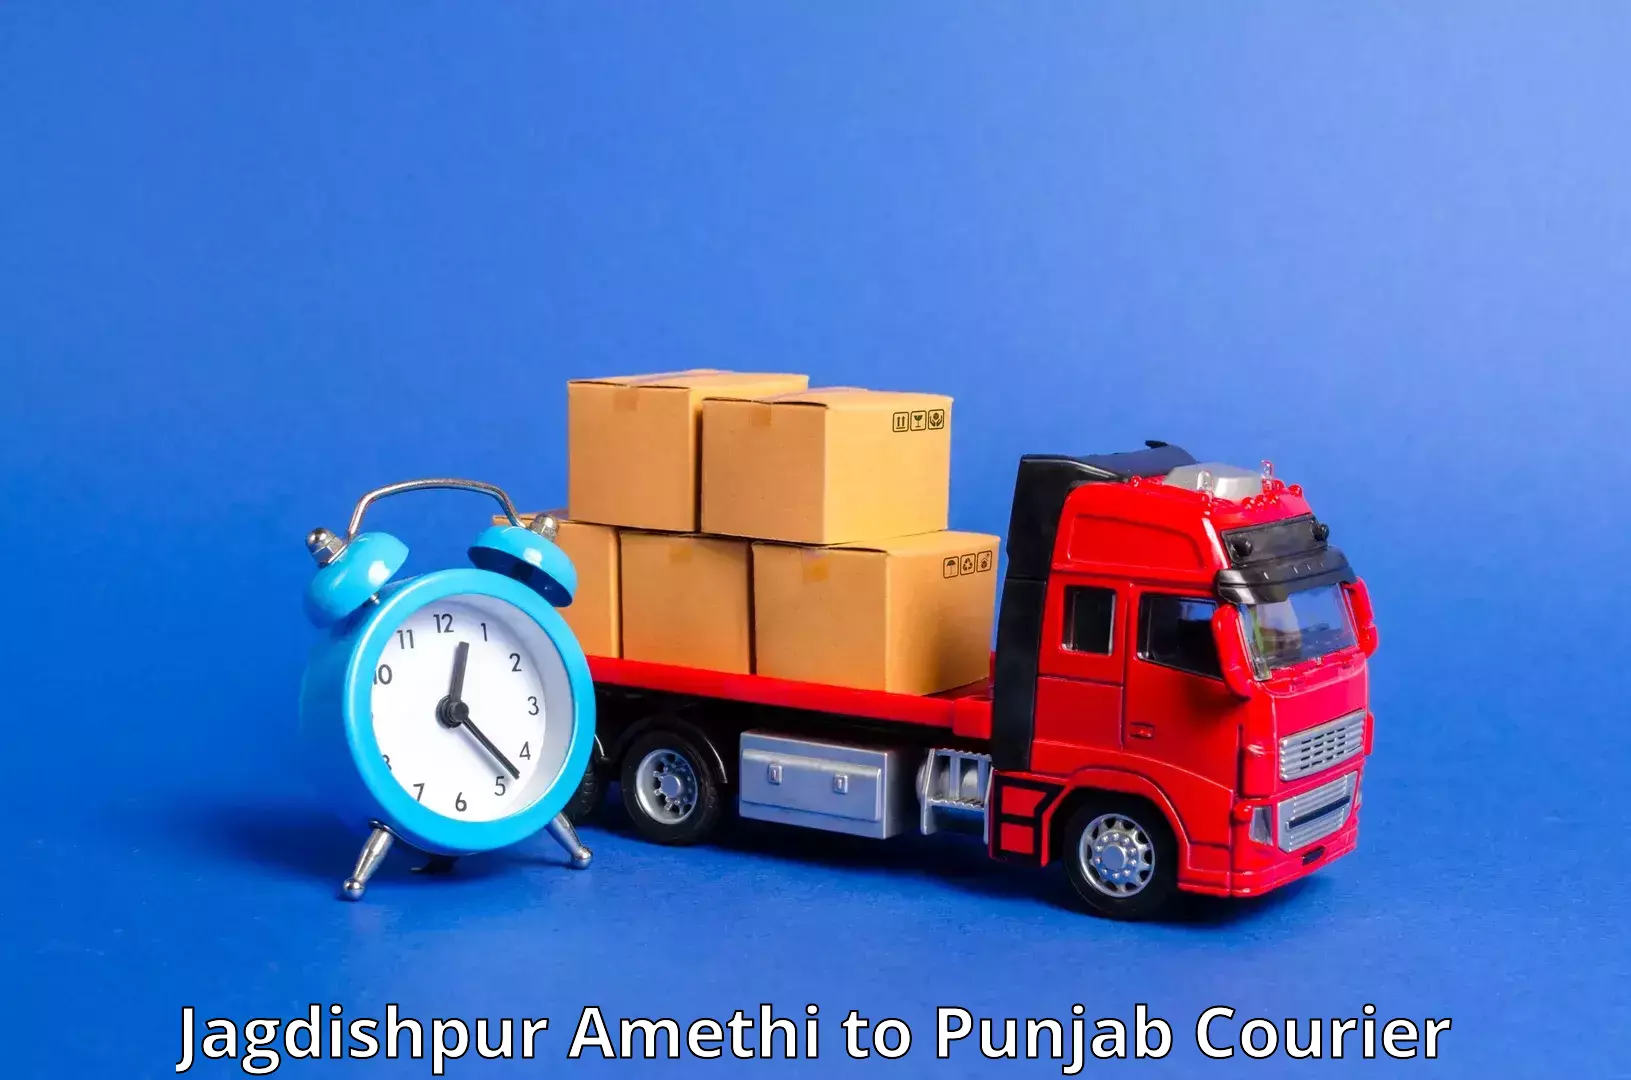 Holiday shipping services Jagdishpur Amethi to Sultanpur Lodhi